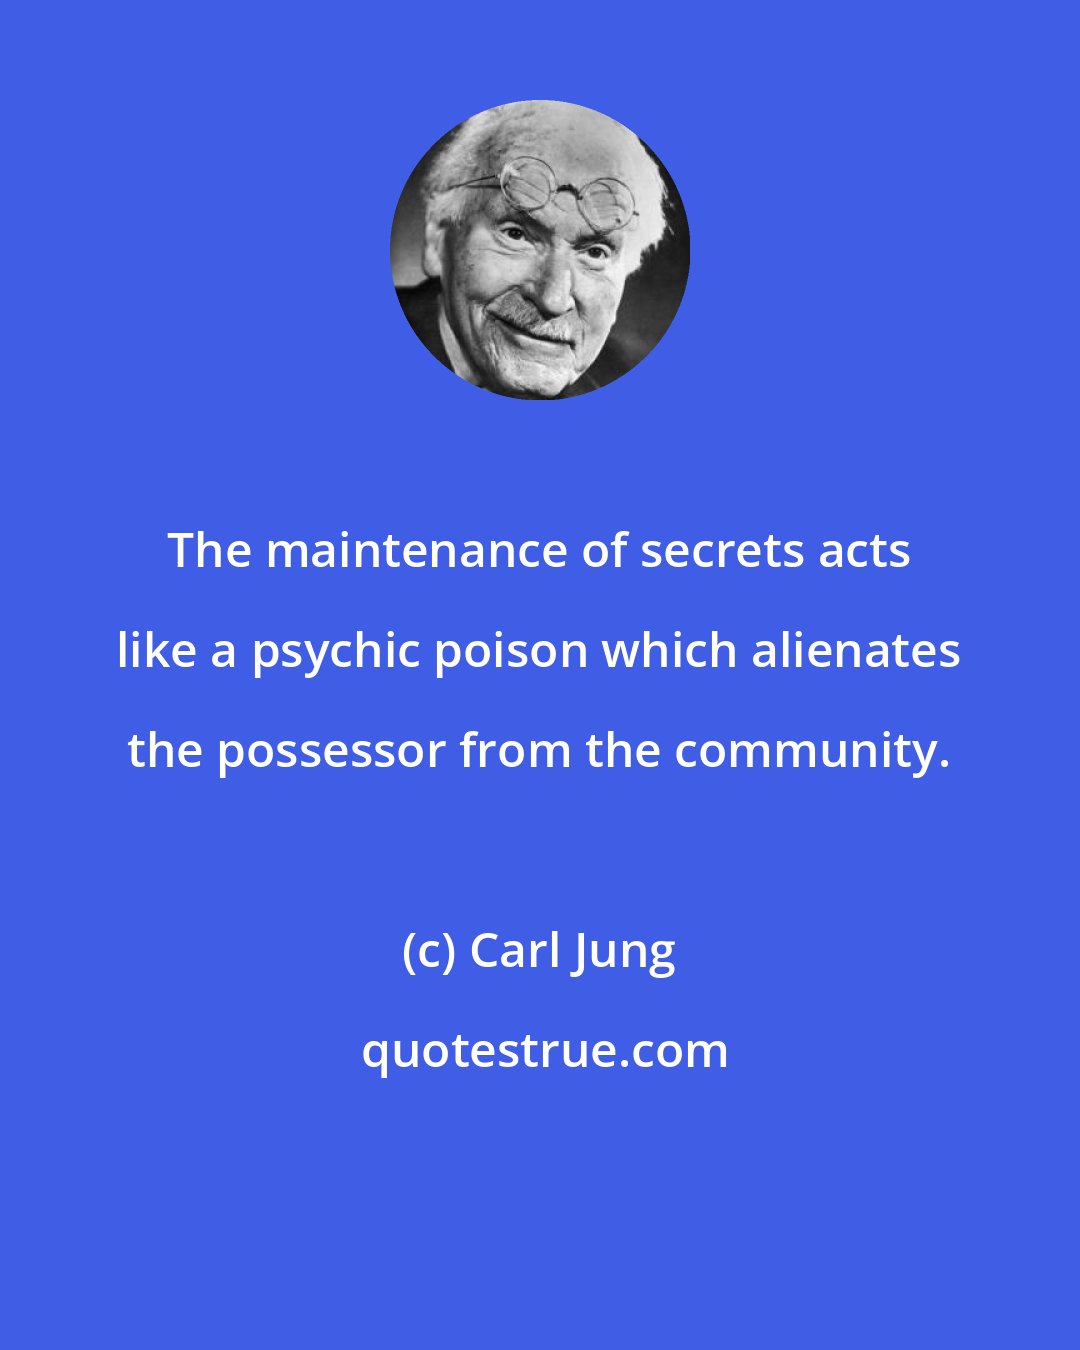 Carl Jung: The maintenance of secrets acts like a psychic poison which alienates the possessor from the community.